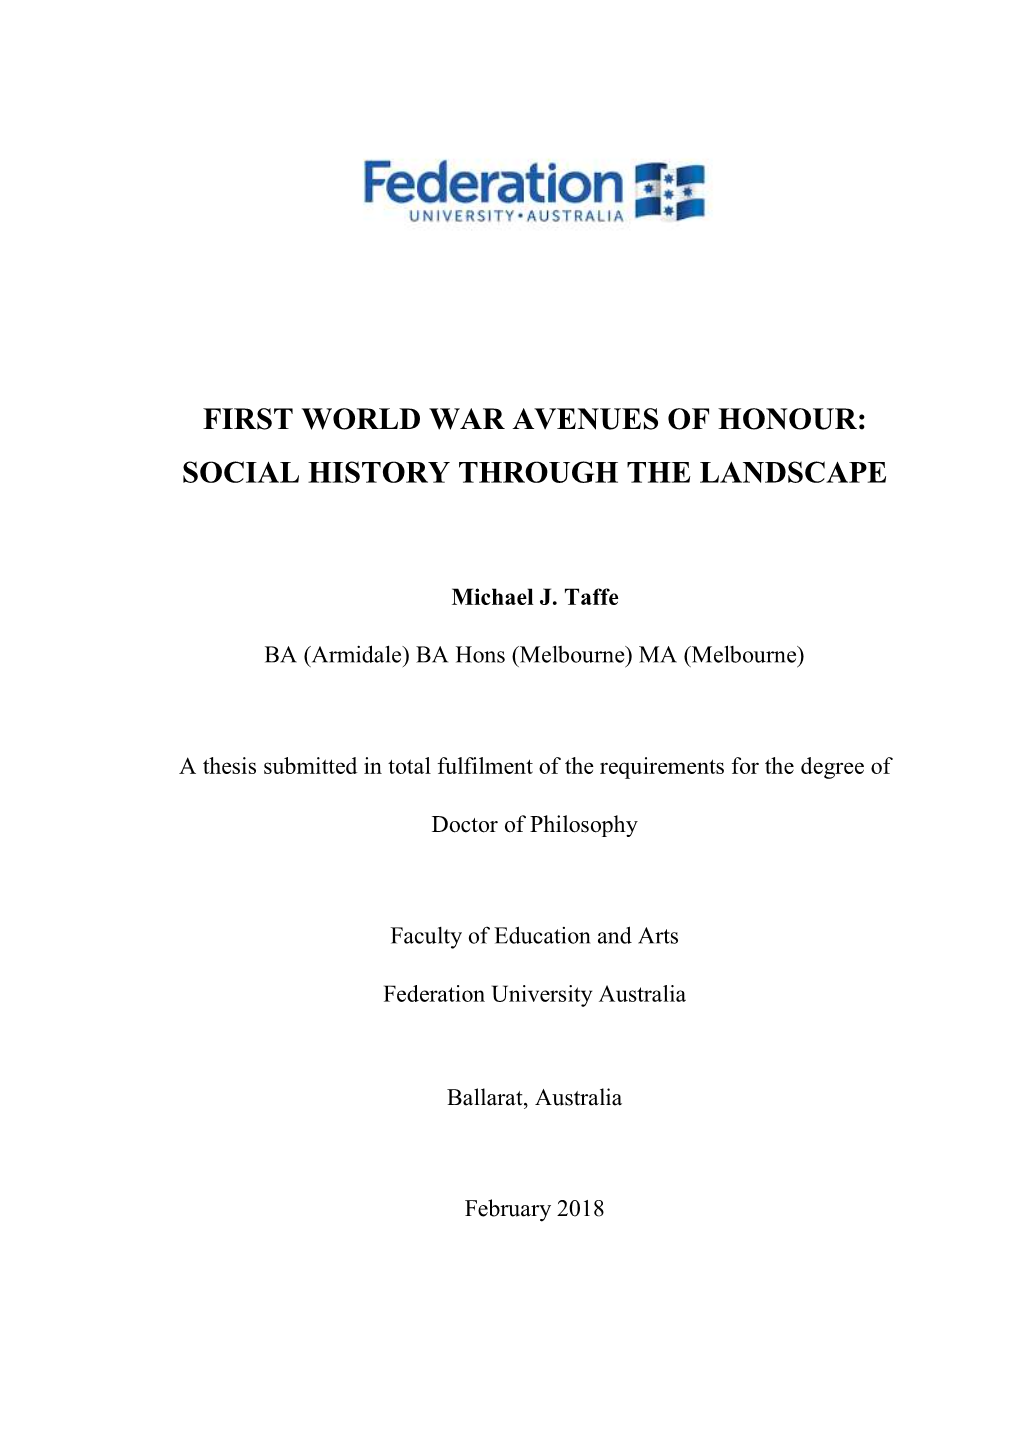 First World War Avenues of Honour: Social History Through the Landscape